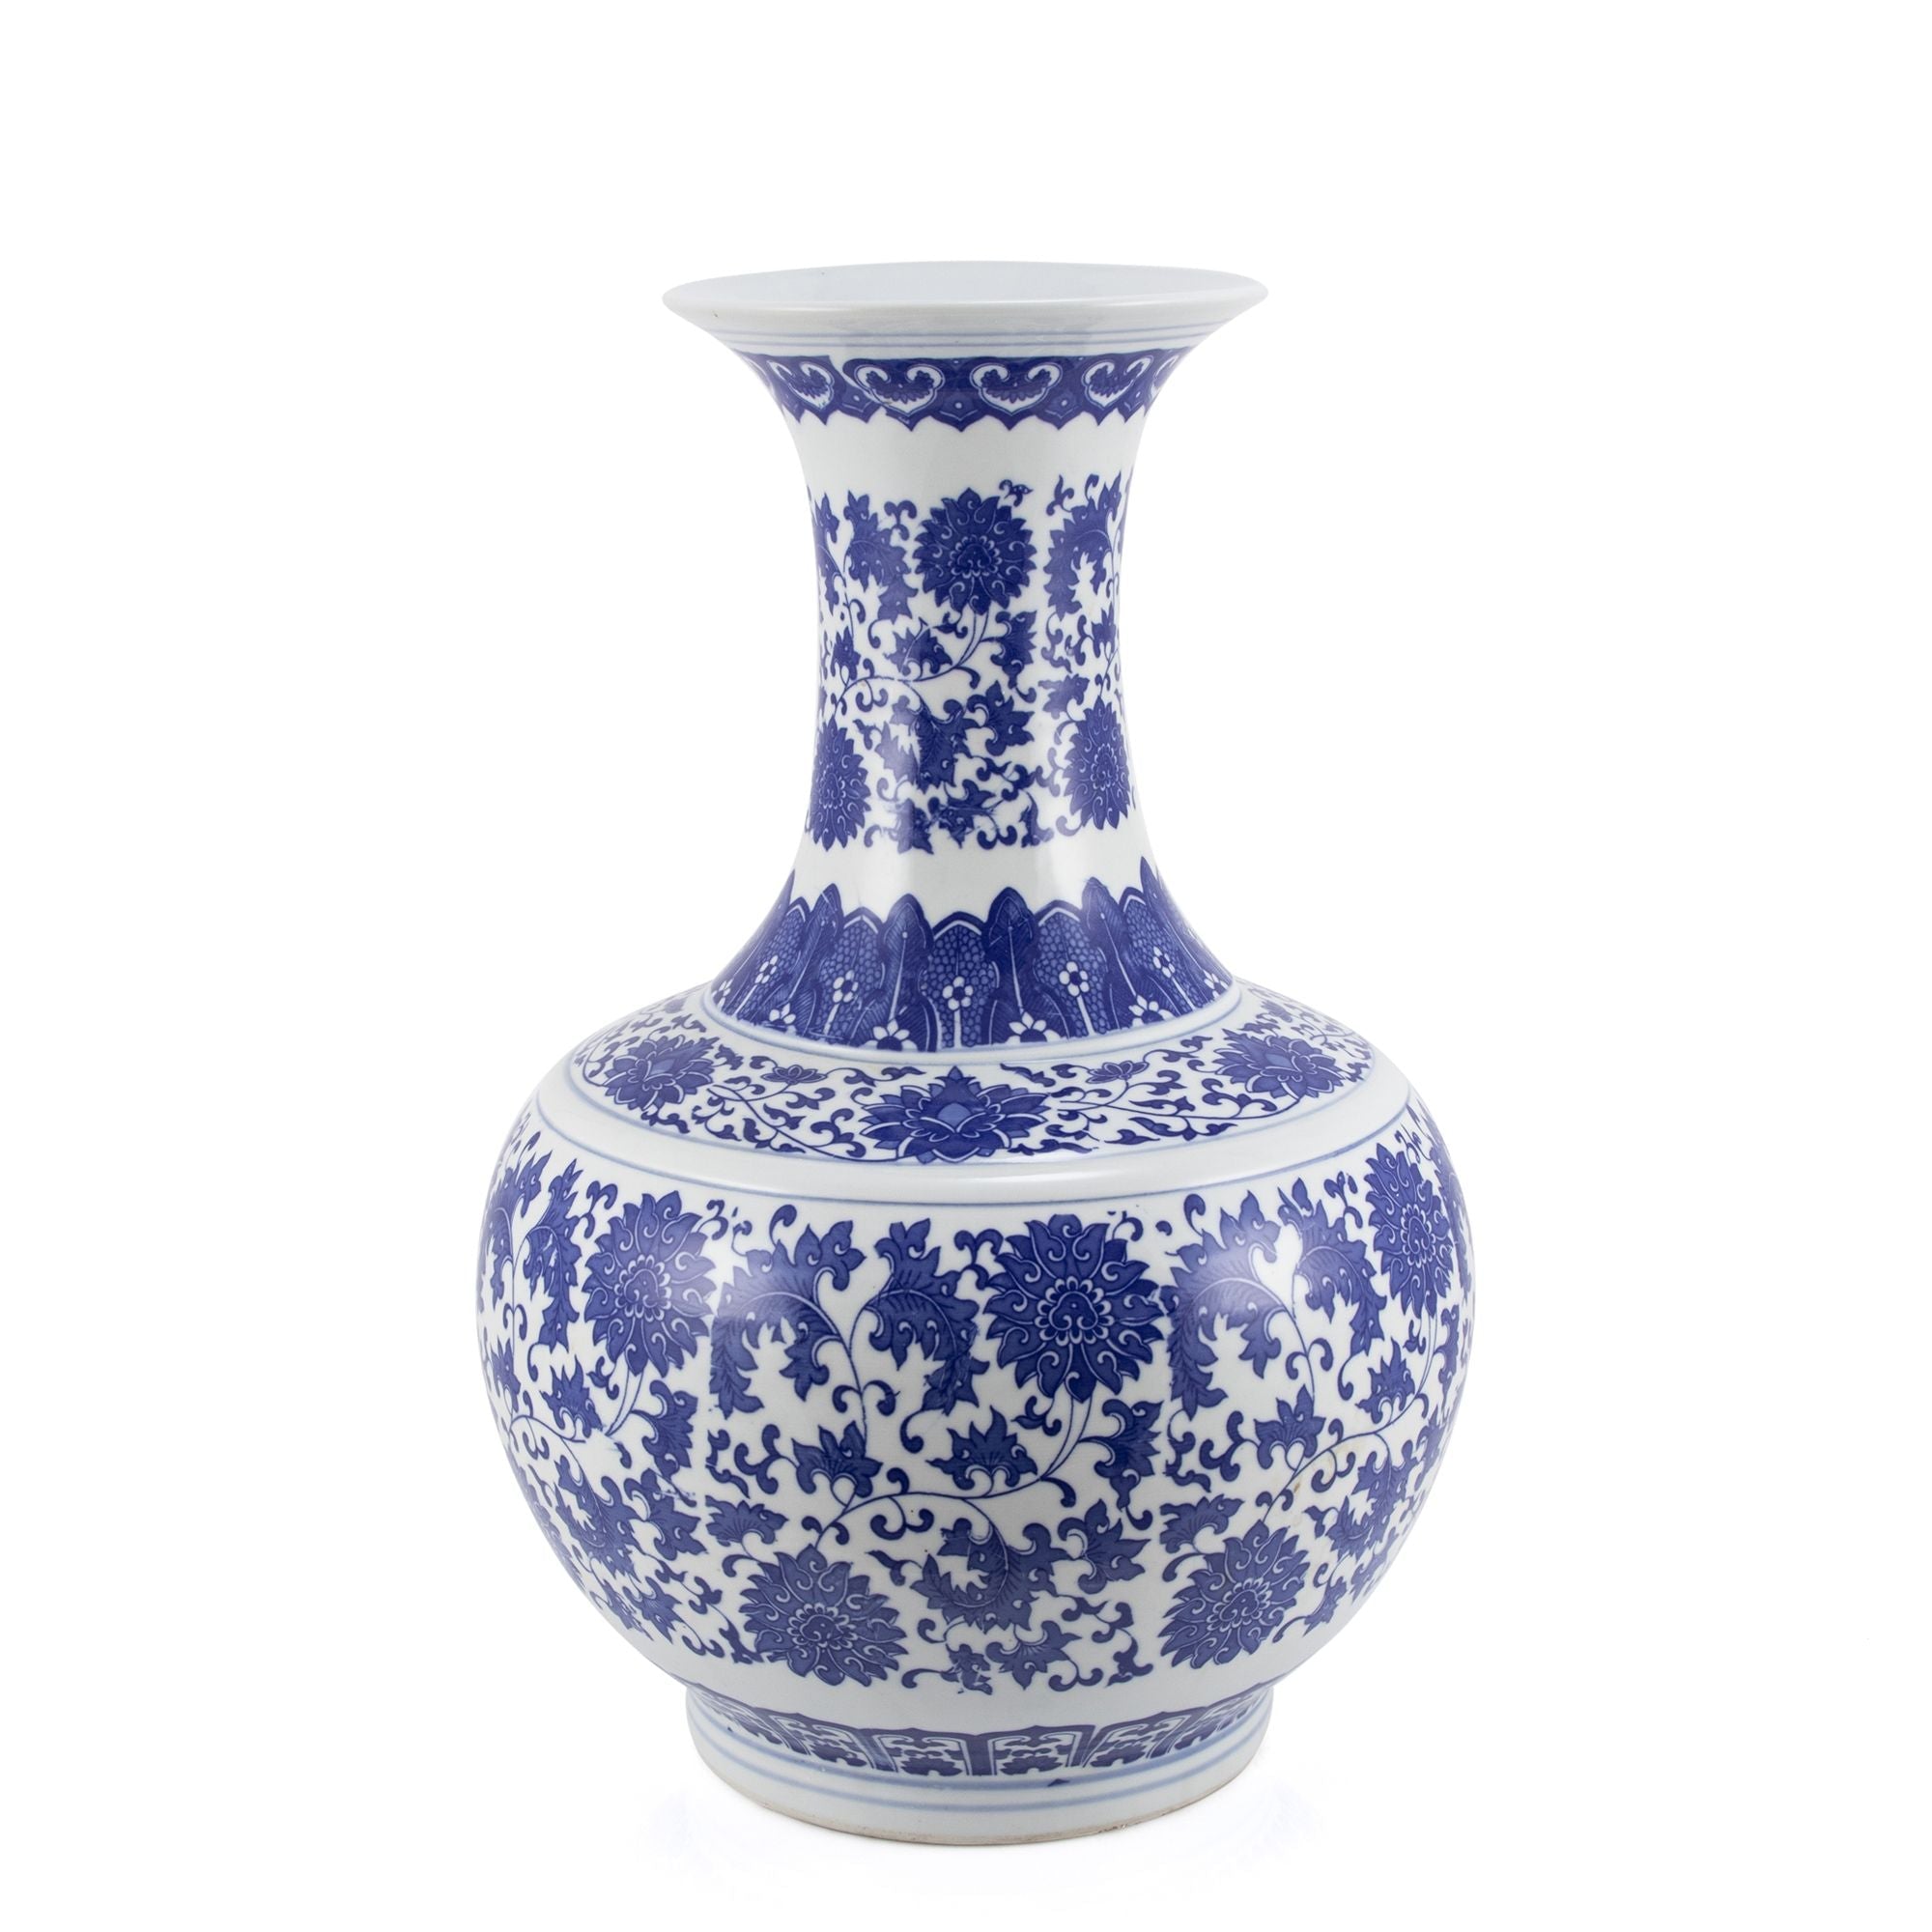 Legend of Asia Giftware Legend of Asia Blue And White Porcelain Lotus Vase